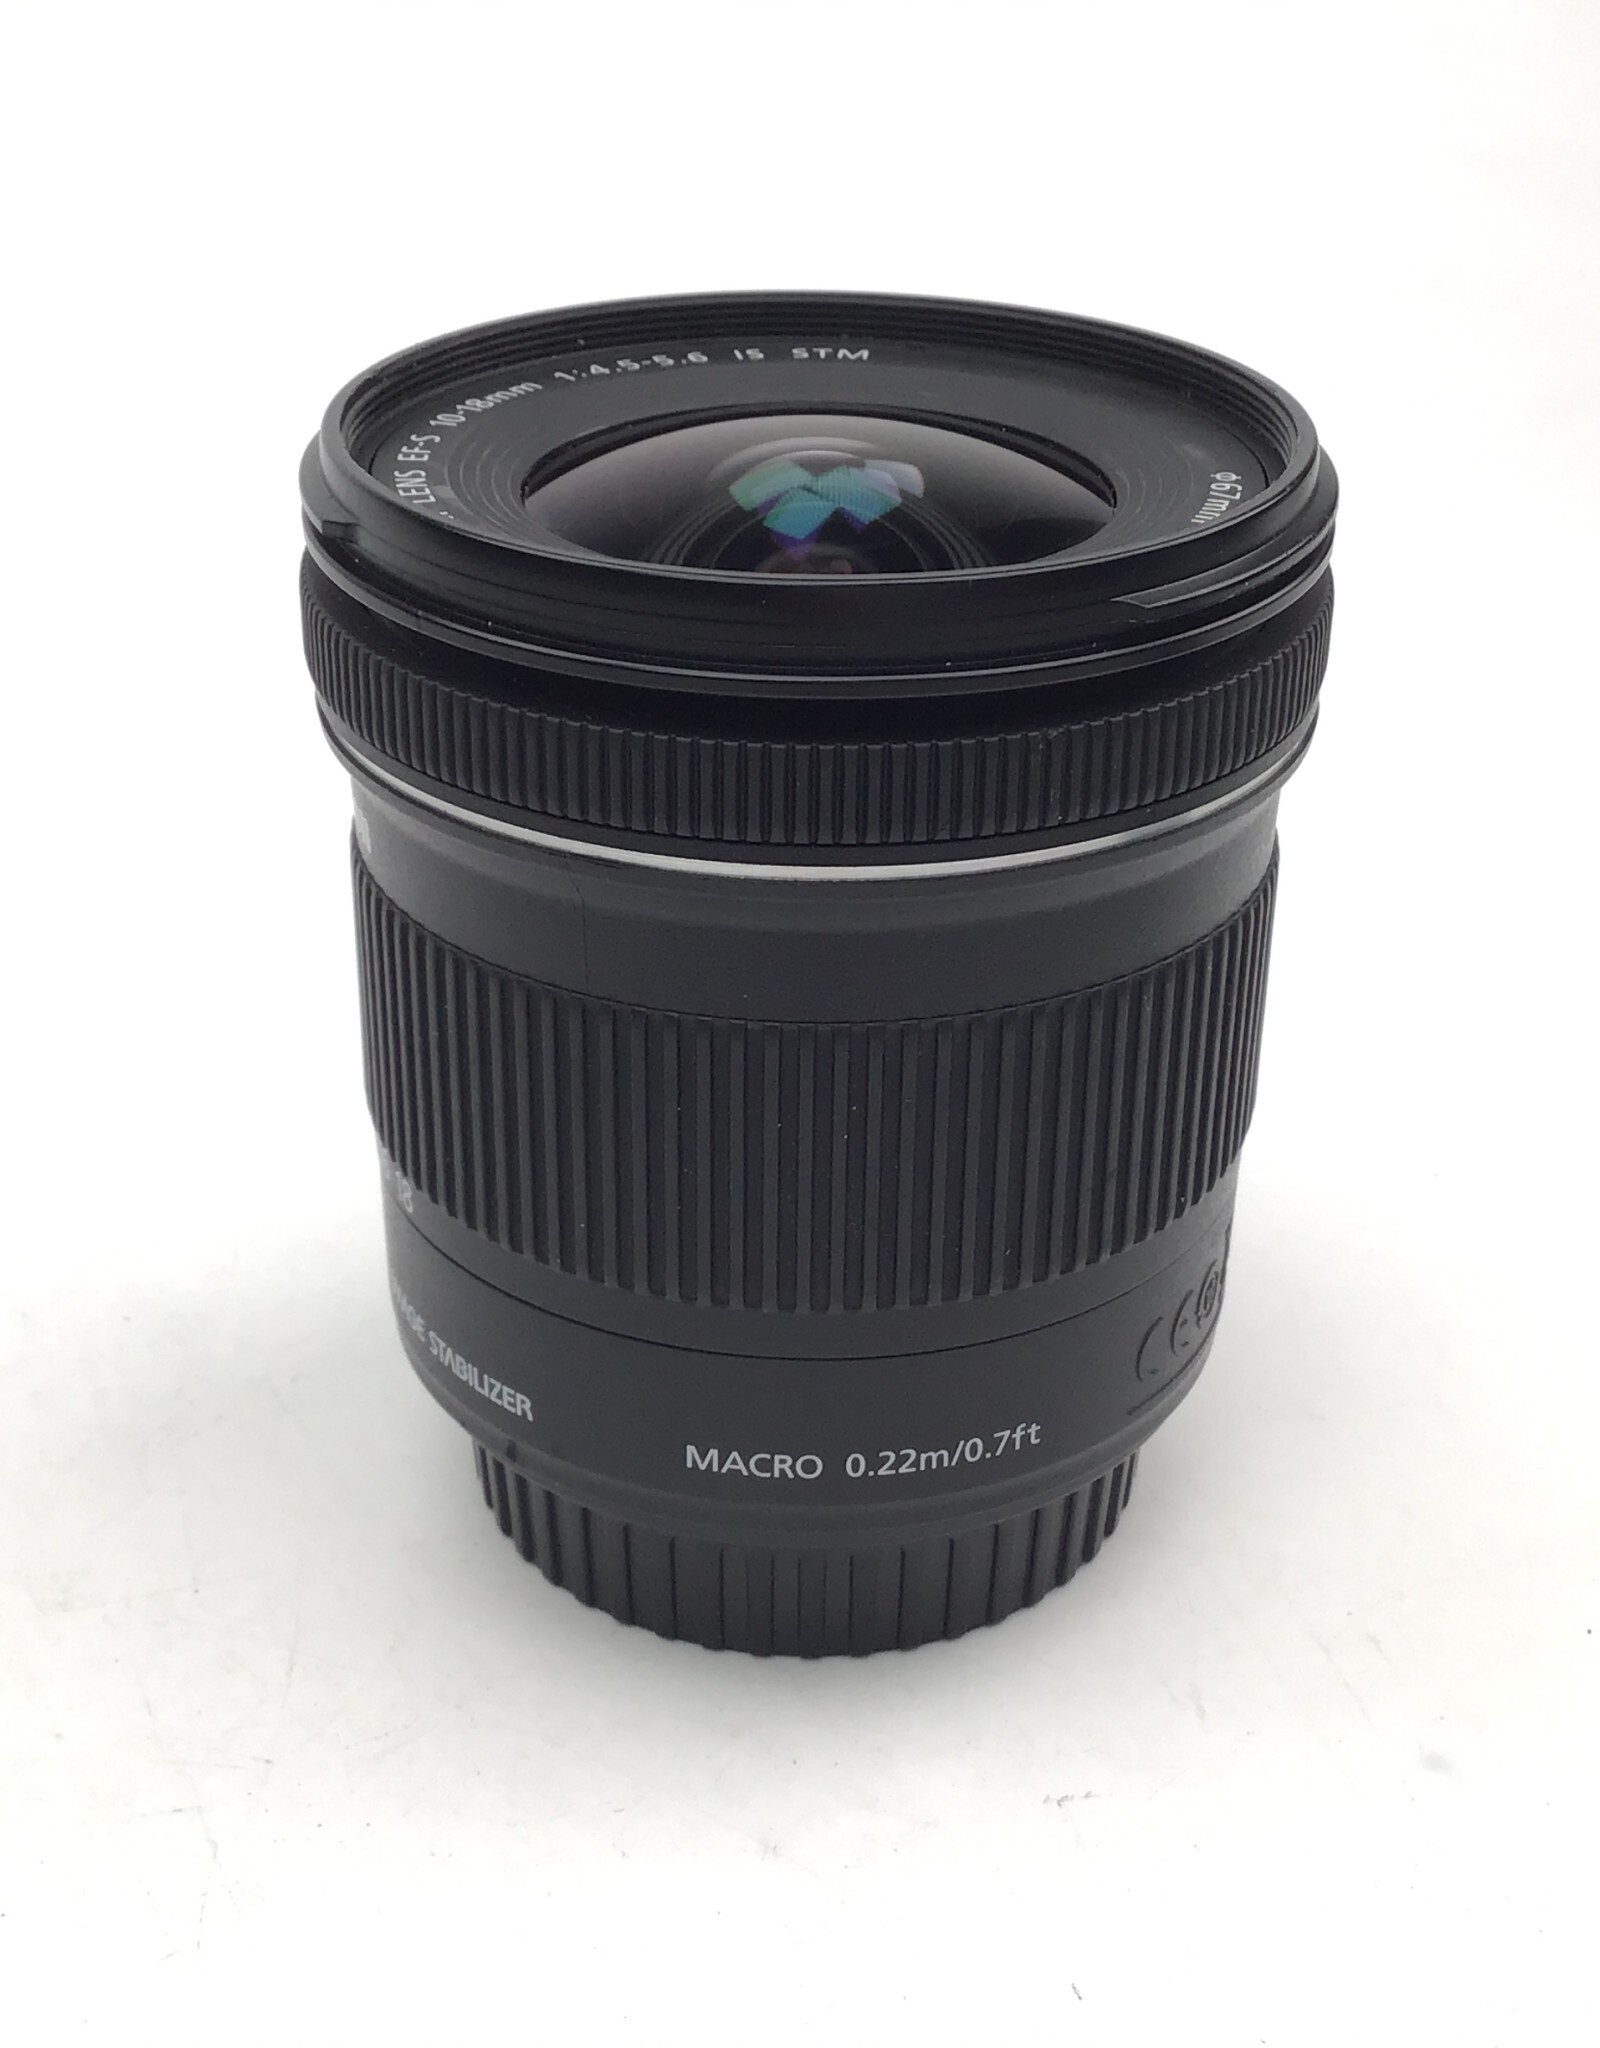 CANON Canon EF-S 10-18mm f4.5-5.6 IS STM Lens Used Good